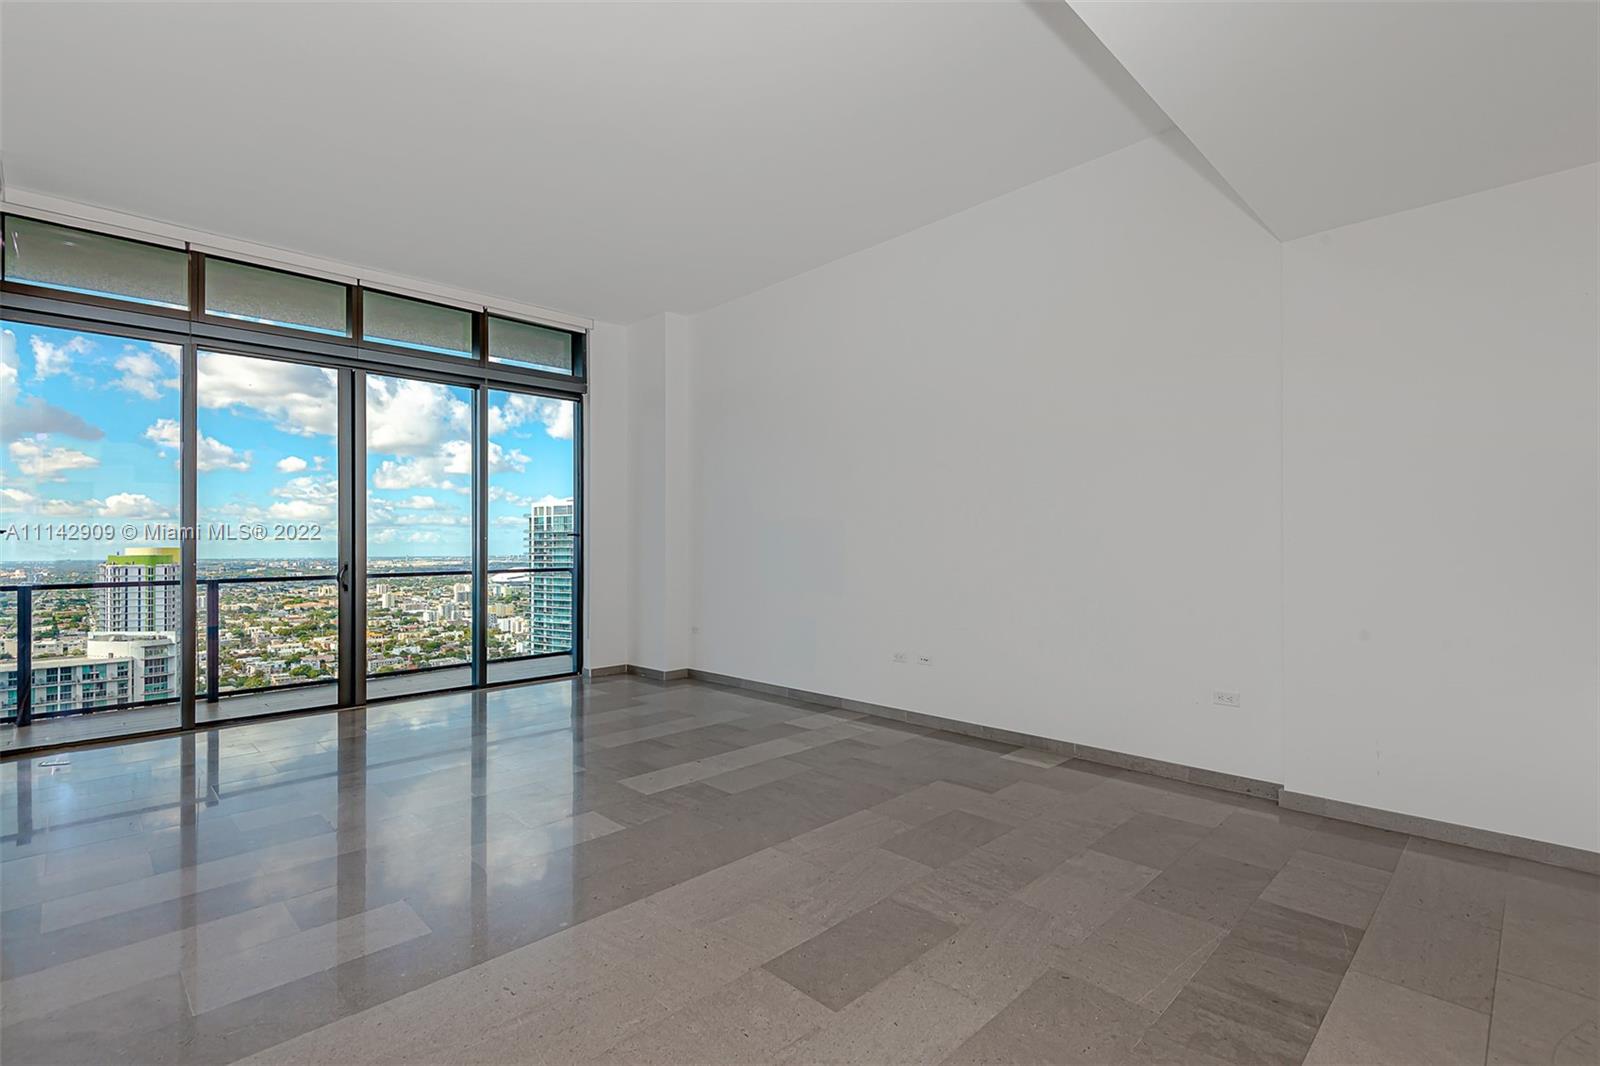 Own a beautiful unit at this exclusive building in the heart of Brickell at Brickell City Centre! Unit features 2 bedrooms, 2 full baths with great panoramic views, Italian kitchen cabinets, quartz counter top, stainless steel appliances, 41st floor with 11.6 high ceilings on this low PH level, 24-h concierge and valet service.  Minutes away to the finest restaurants, shops and luxurious mall already opened and established.